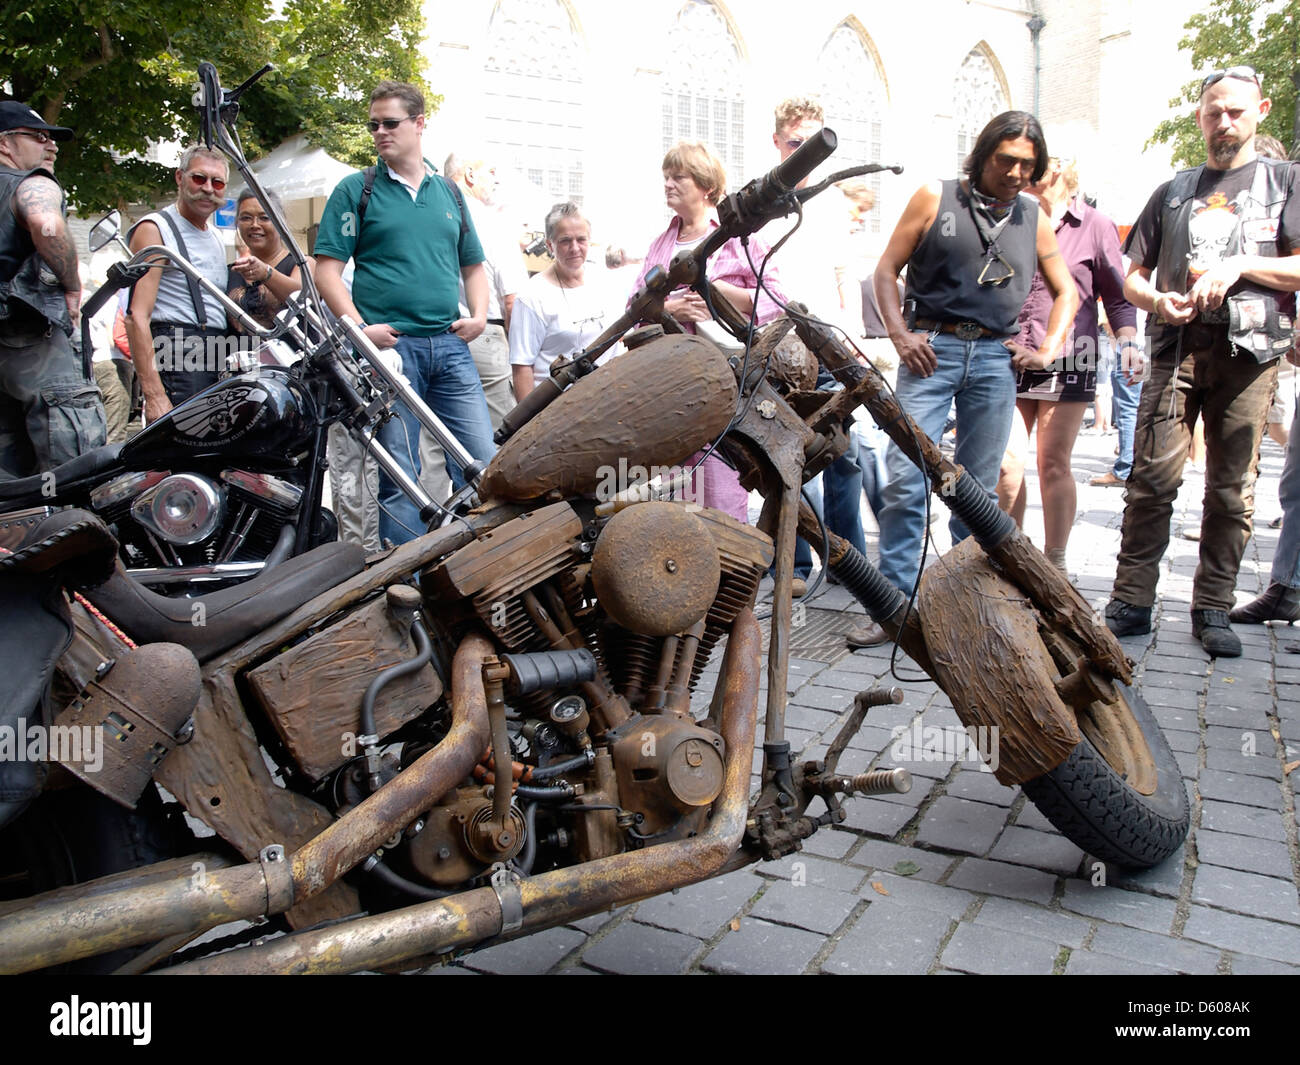 So called "rat bike" a specific style of custom bike this one looks very  rusty. Harley day in Breda the Netherlands Stock Photo - Alamy